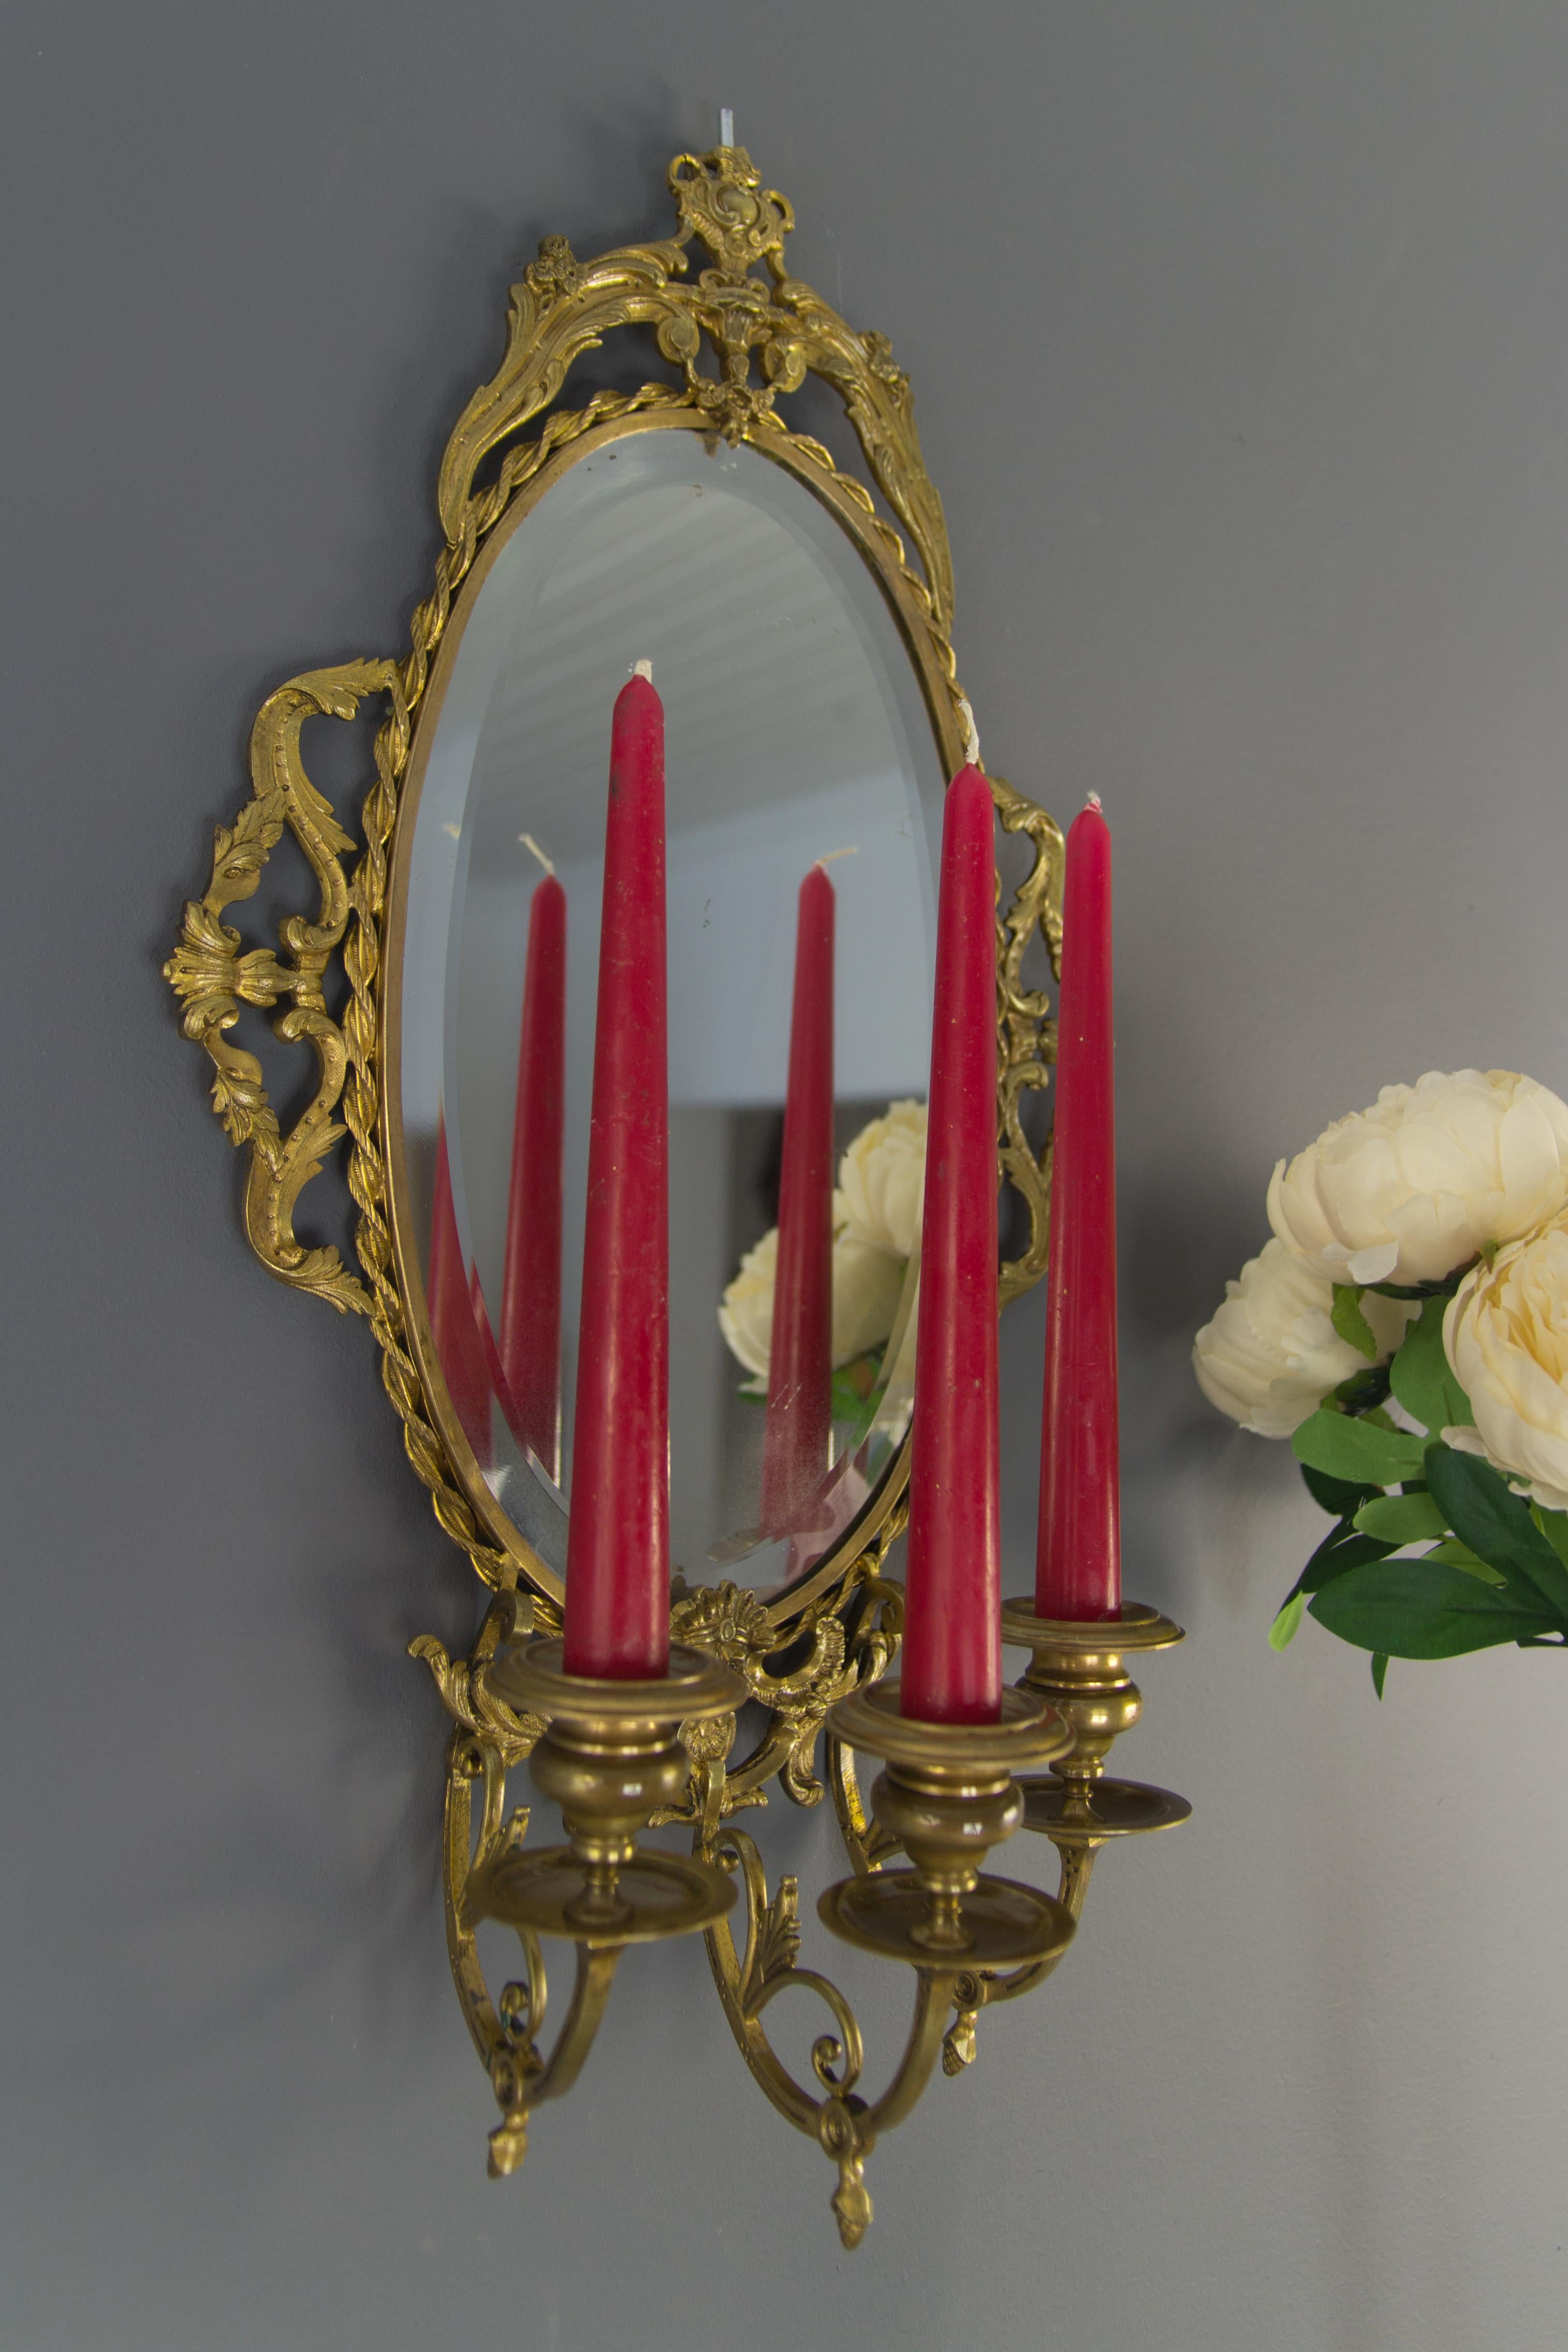 This Louis XVI-style girandole wall mirror has a bronze frame surrounding a beveled oval mirror plate. The frame is decorated with leaves, flowers, scrolls, and a boy’s face. Beneath are three candle sconces, and the arms are decorated with leaf